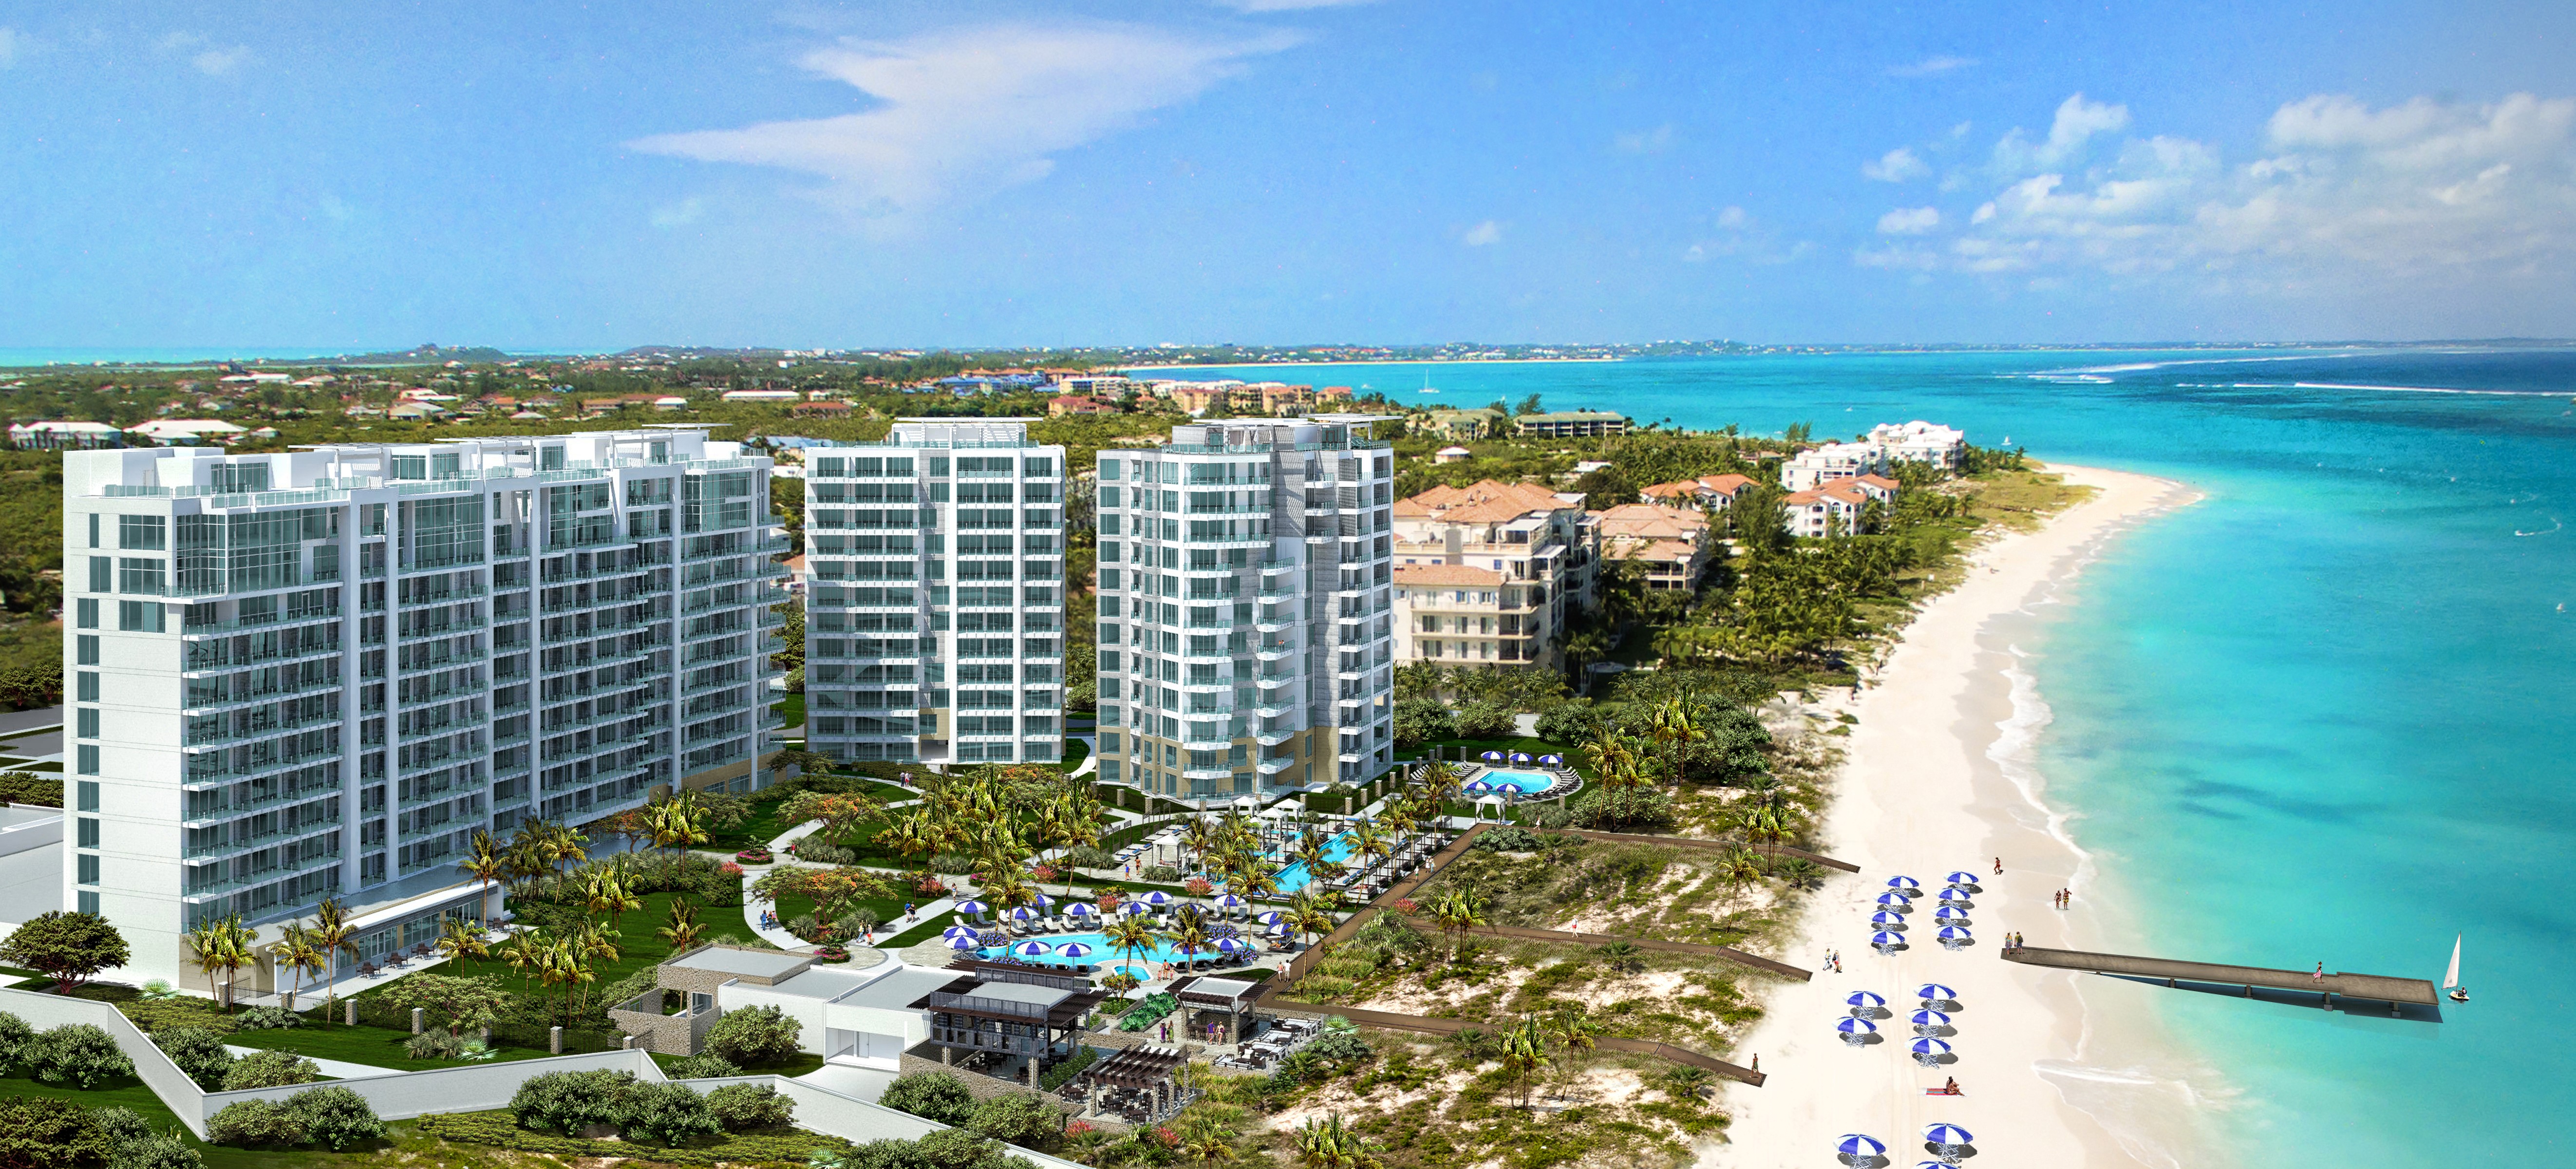 Ritz-Carlton Turks and Caicos and FortisTCI Partner for Sustainability